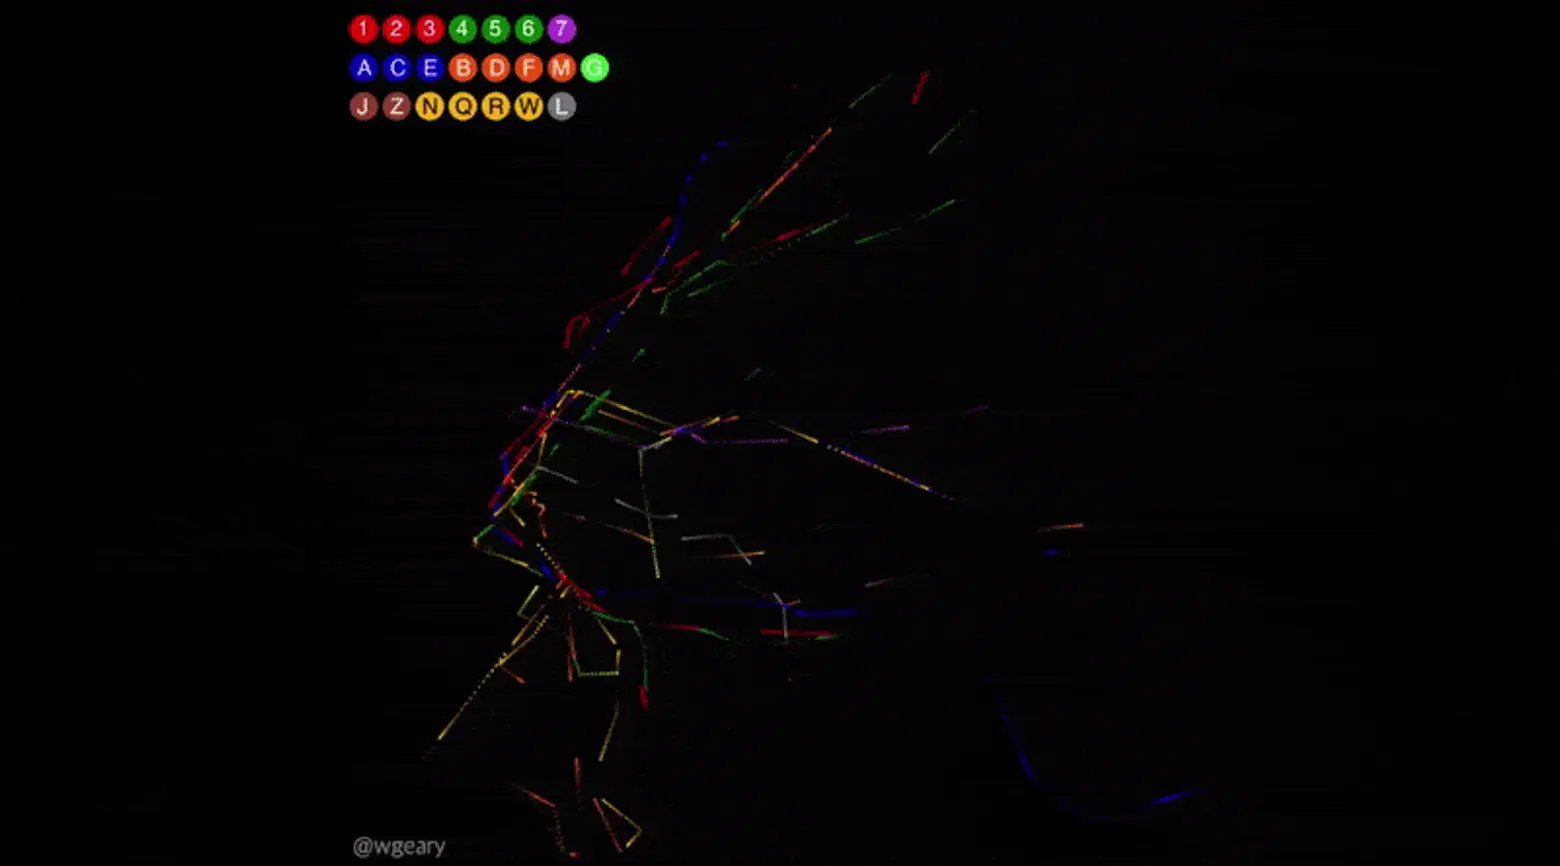 Watch 24 hours of NYC subway activity in one hypnotizing map